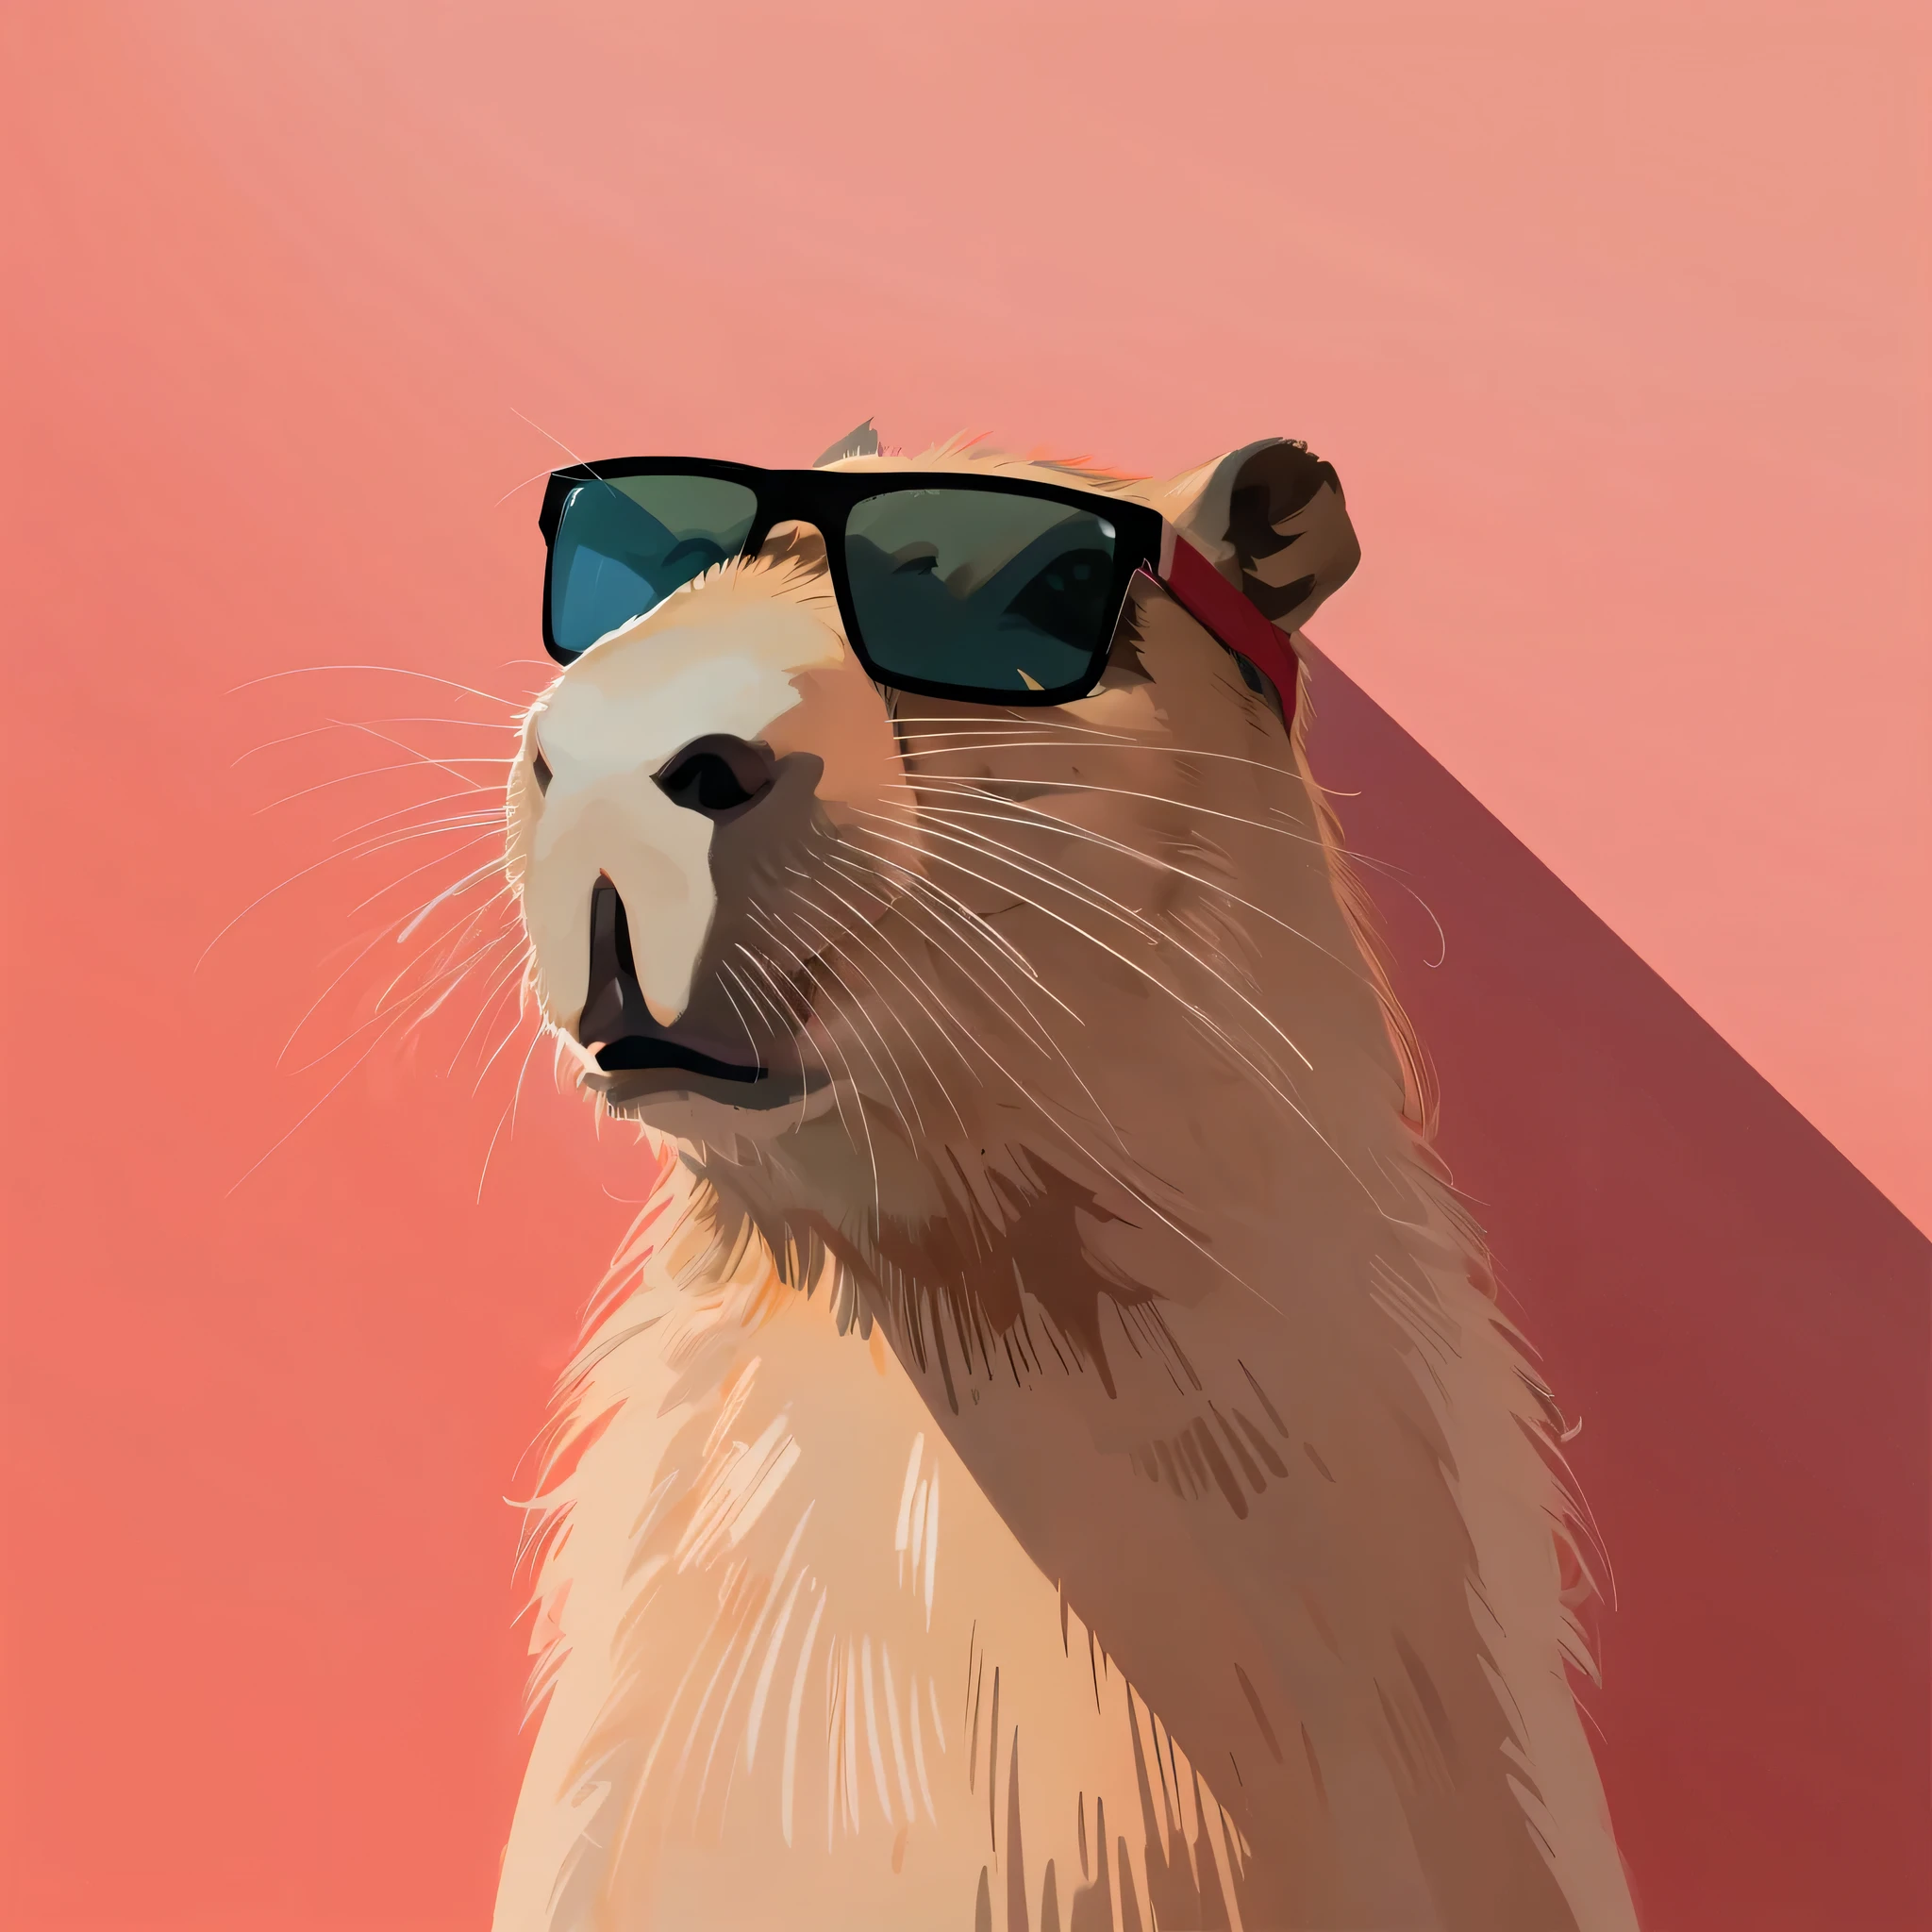 minimalistic taiwanese style graphic,cool capybara with sunglasses,capybara,full capybara visible,illustration,ultra-detailed,vibrant colors,sharp focus,playful,detailed sunglasses,stylish sunglasses,cute expression,chilled,casual background,stylized art,unique design,relaxed atmosphere,subtle shading,pop art style,flattened perspective,geometric shapes,stylized proportions,abstract elements,colorful palette,lighting effects